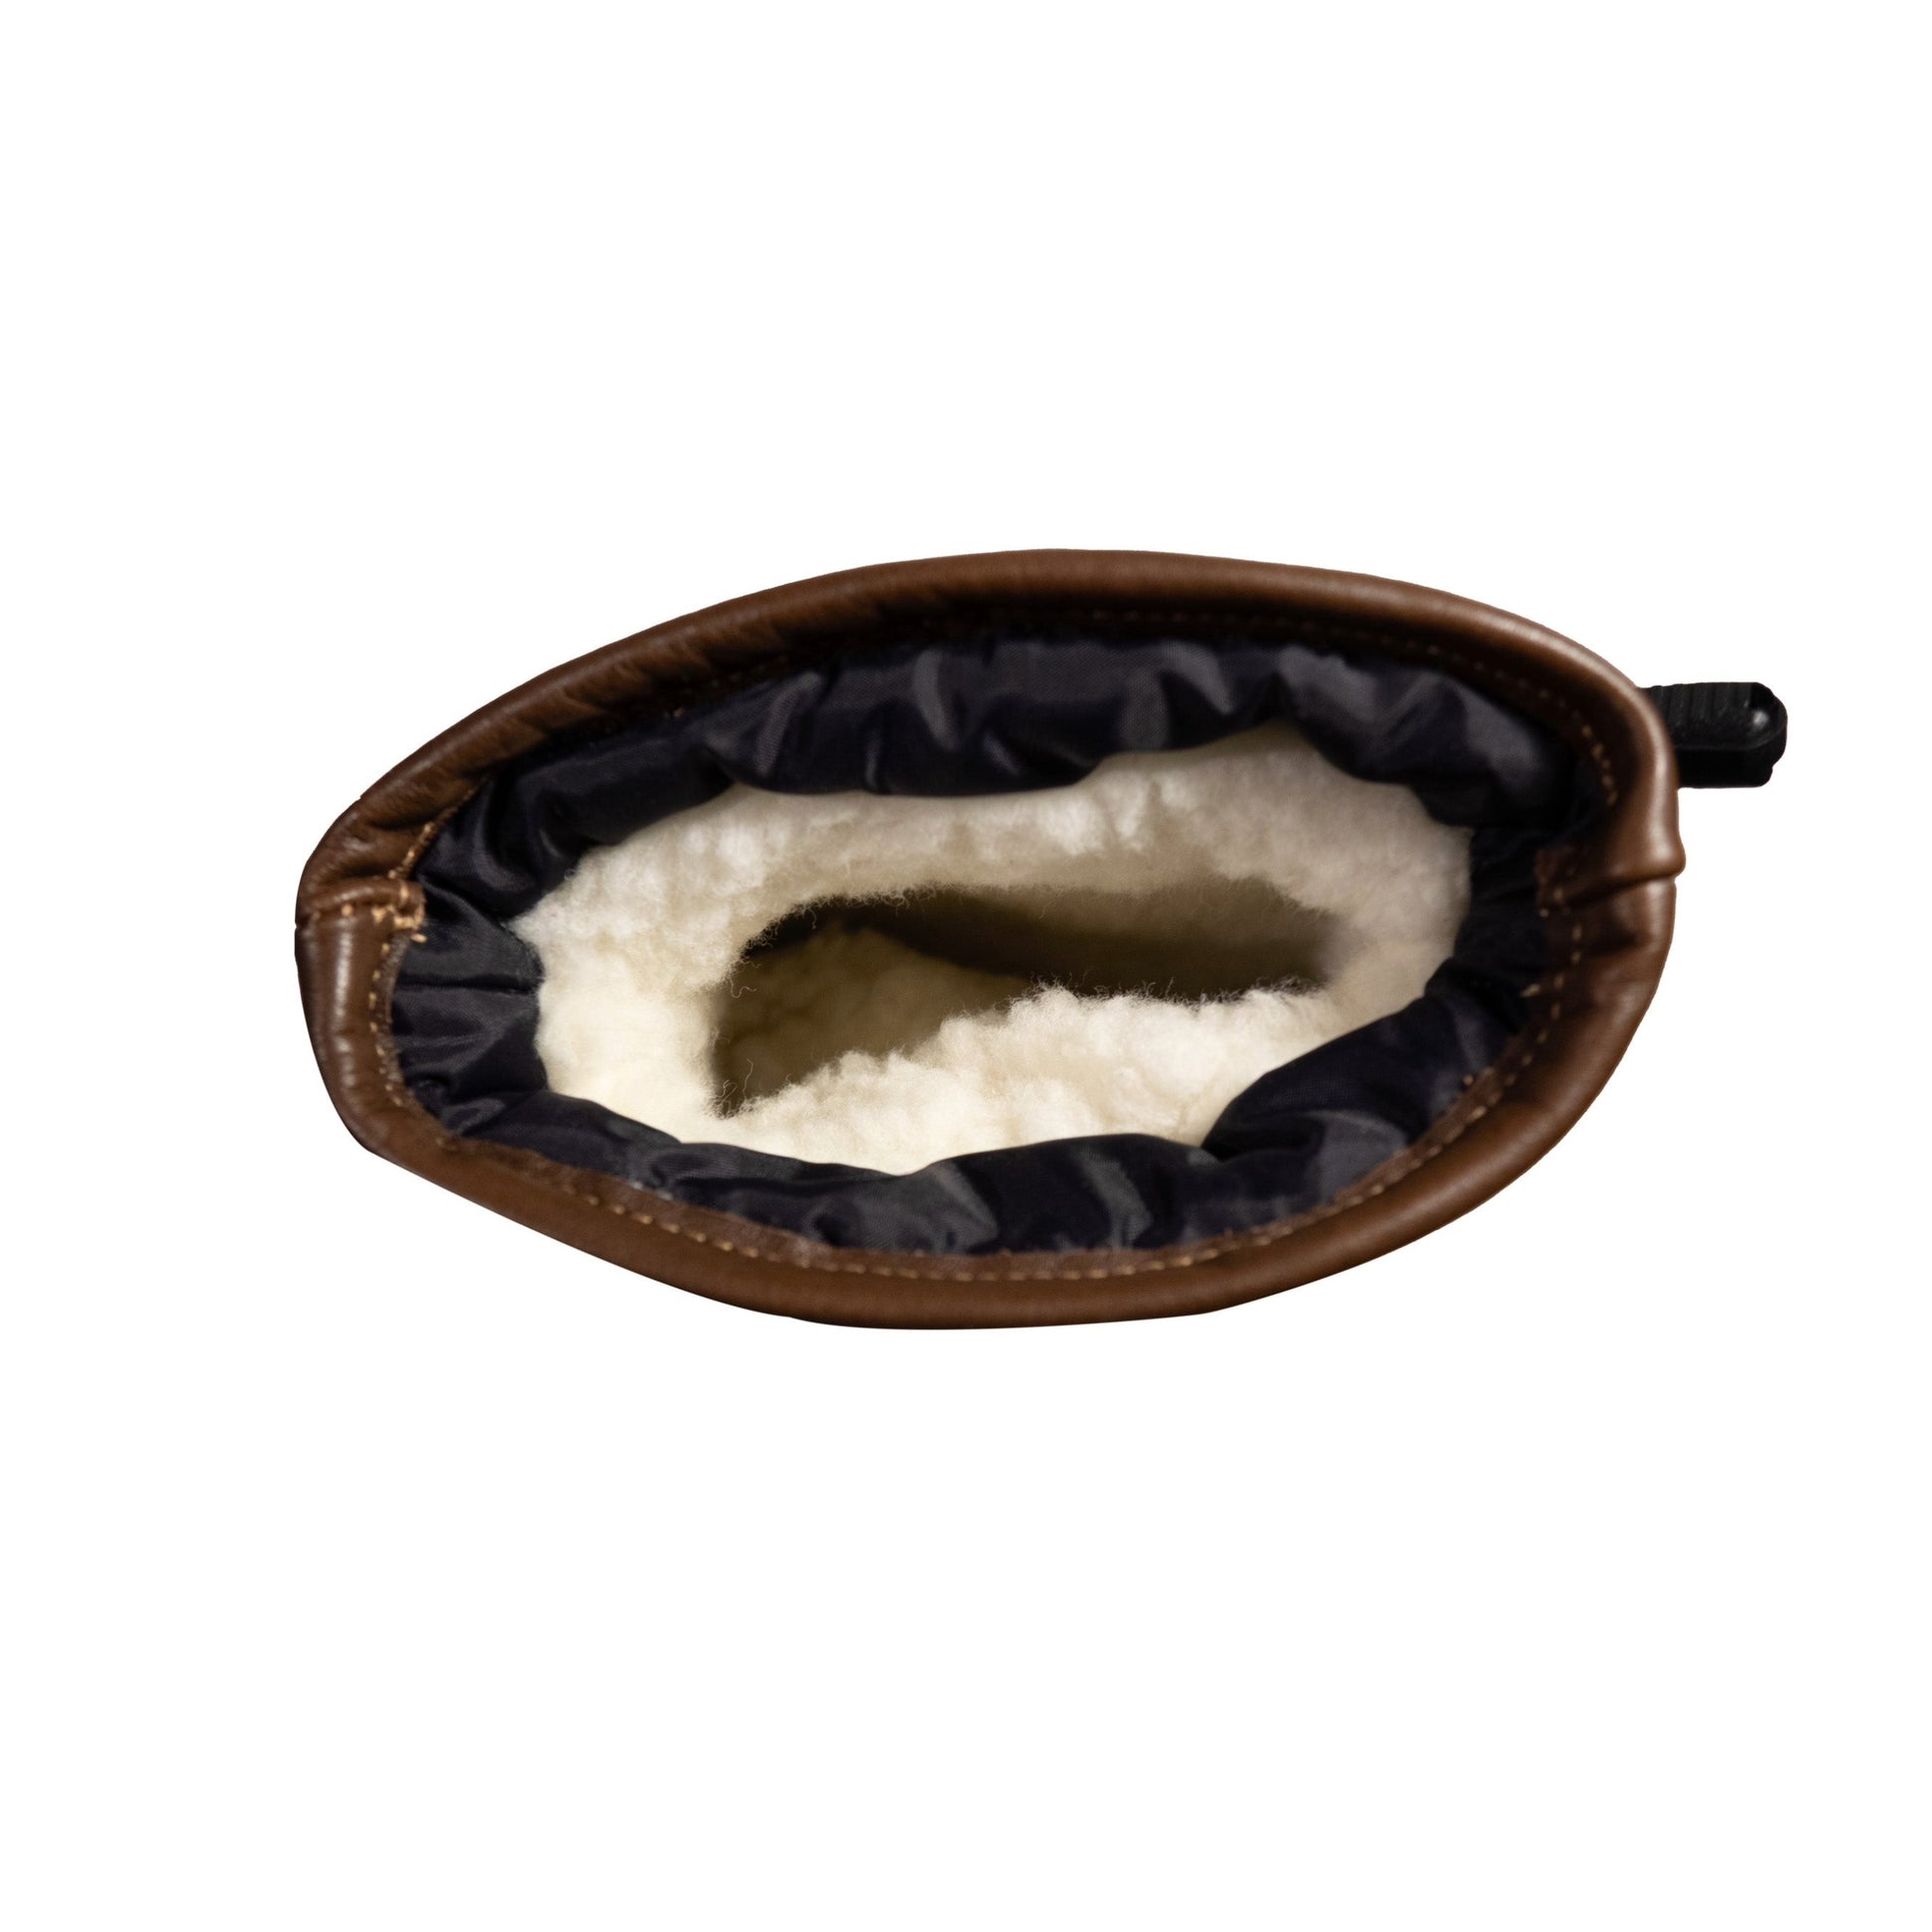 The inside of a brown shearling pouch features a soft wool-fleece lining.